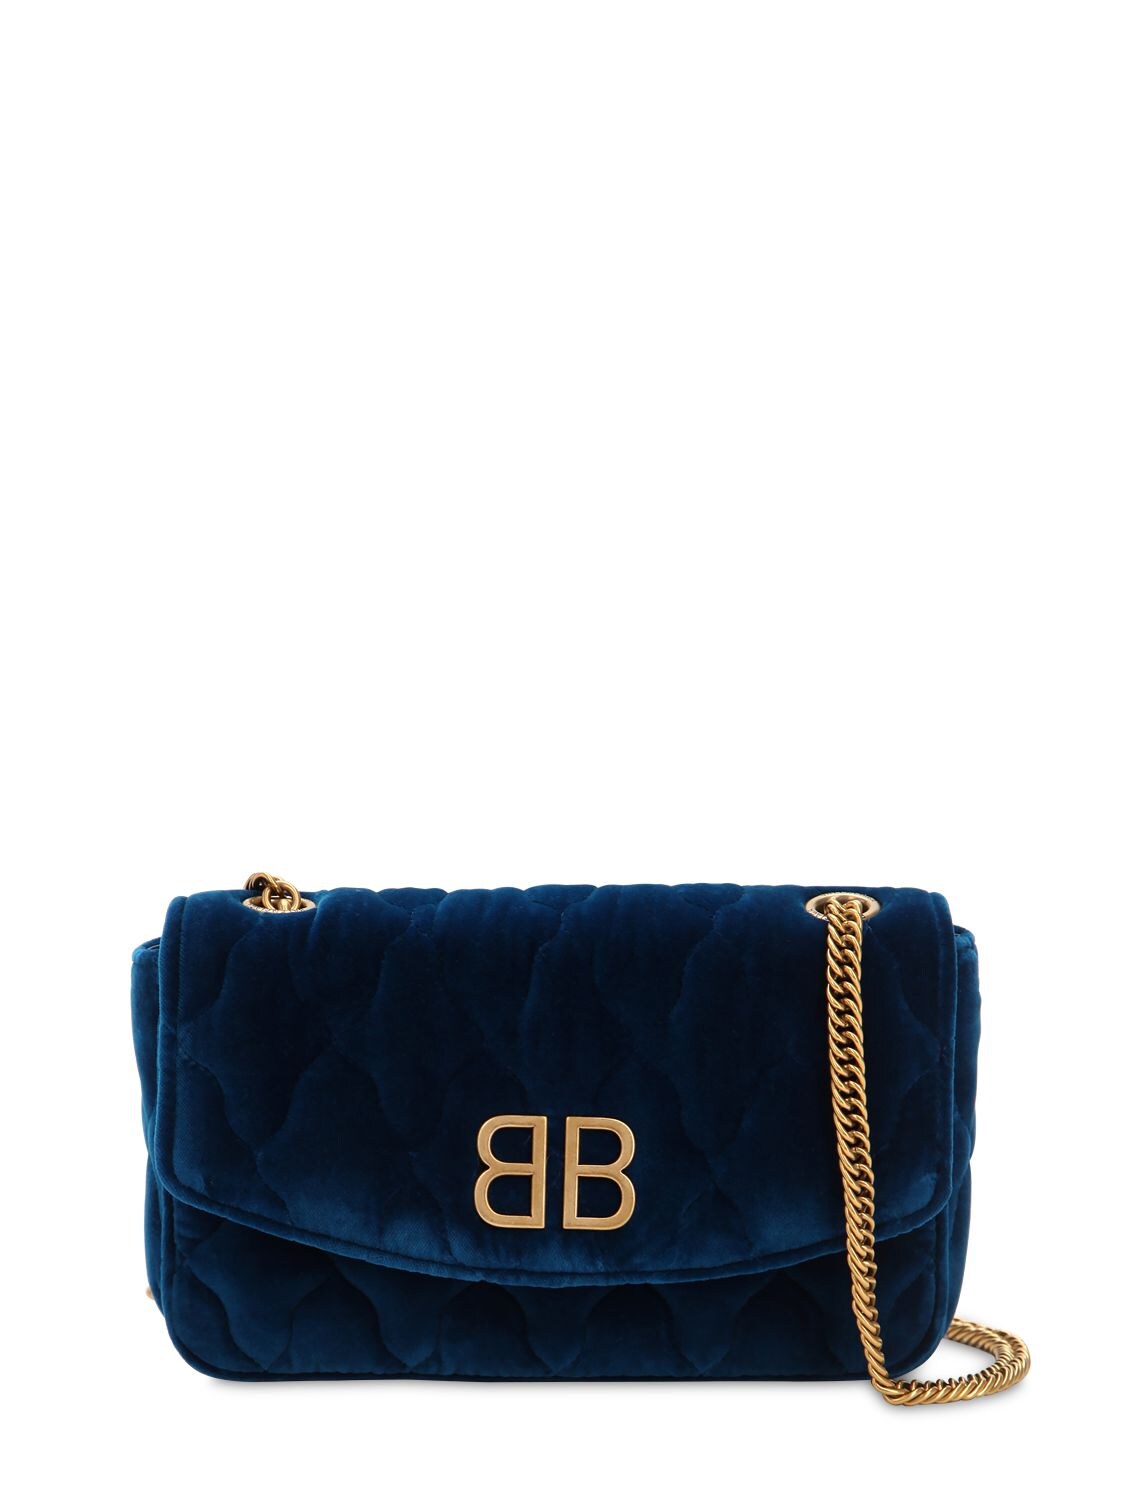 Balenciaga BB Wallet on Chain Quilted Velvet Small Blue Bag. M